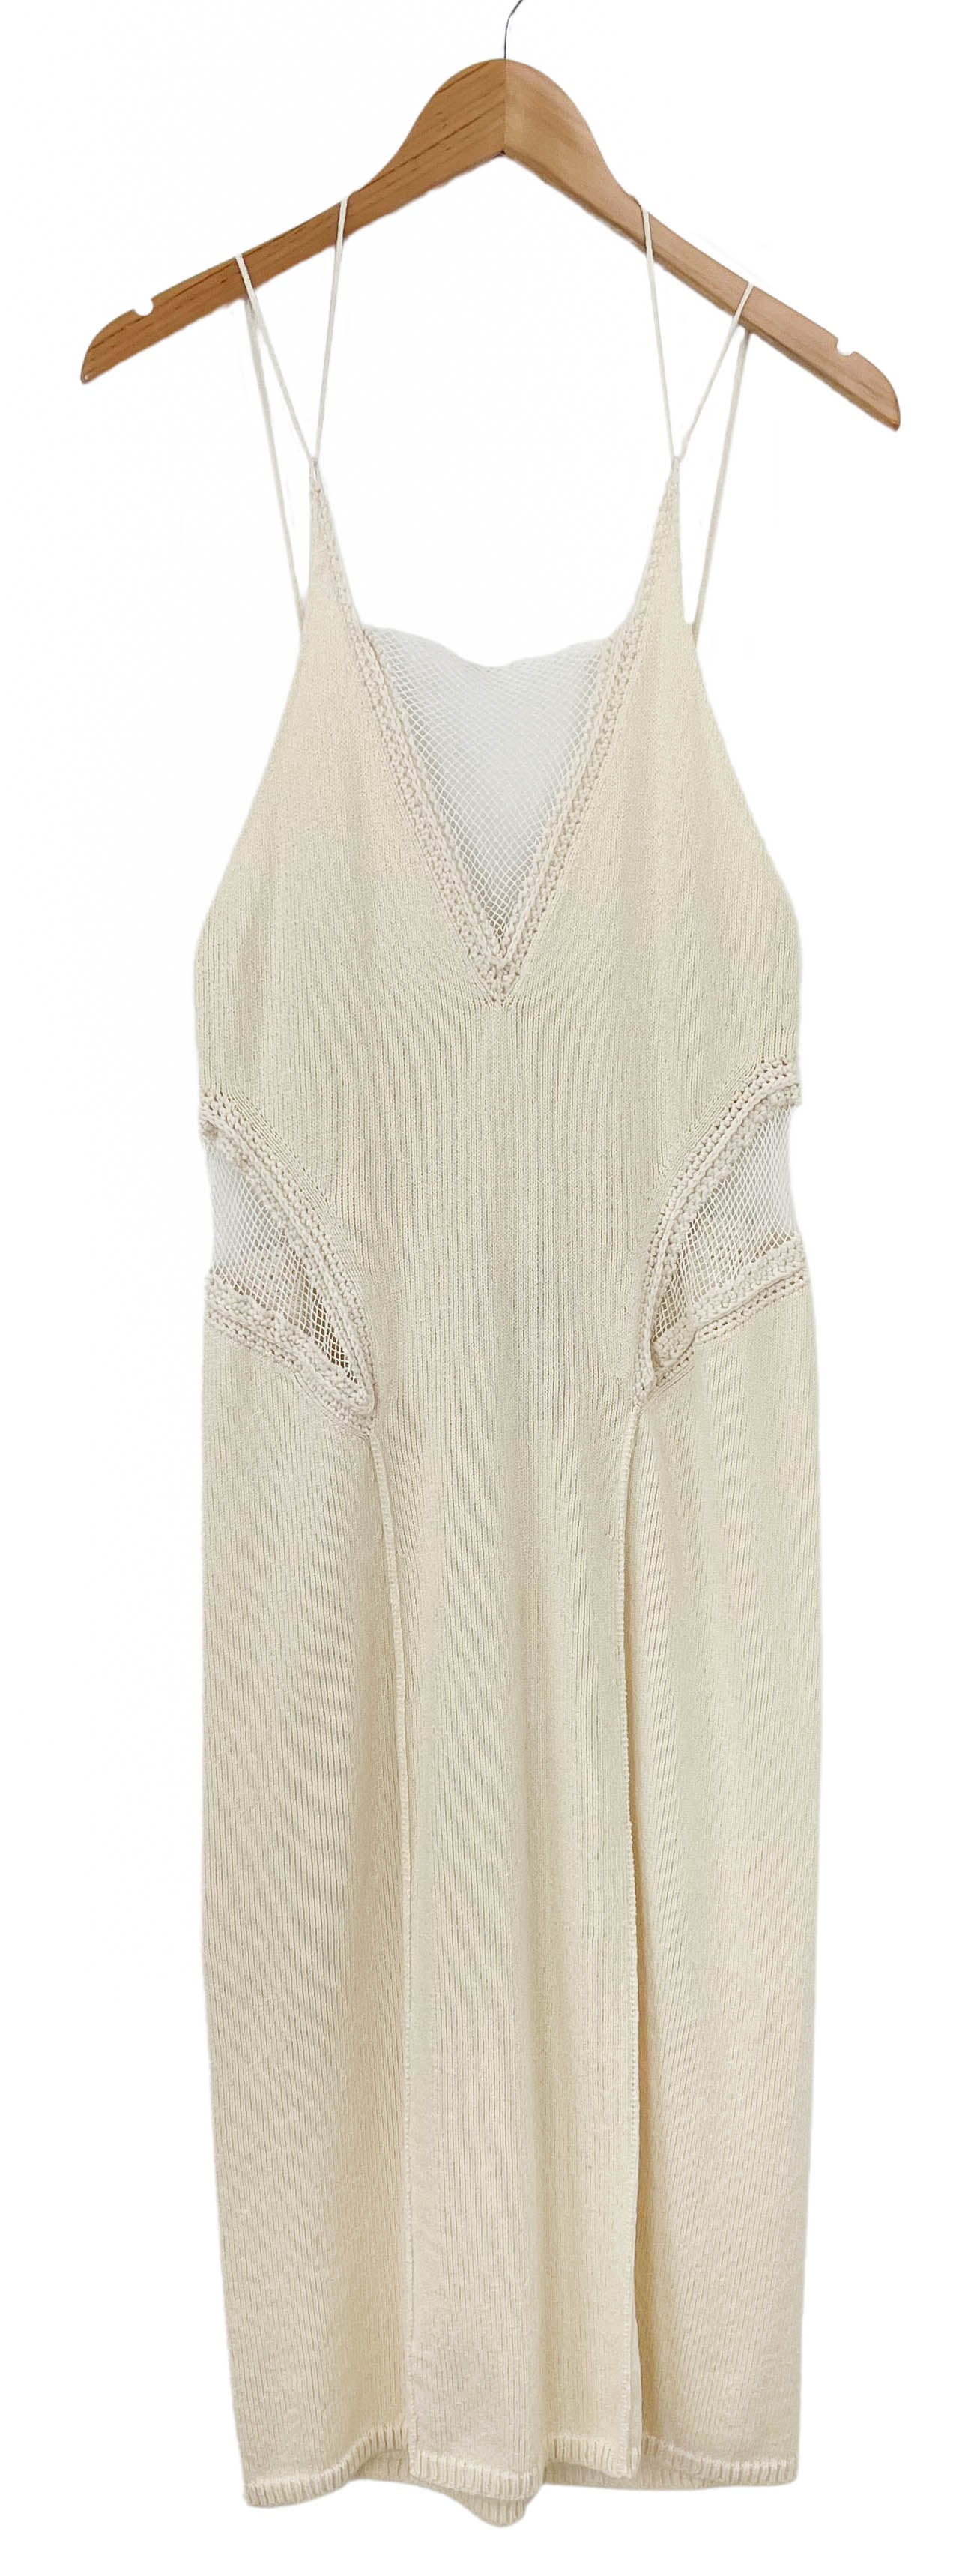 Aisling Camps Fretwork Dress in Cream - Discounts on Aisling Camps at UAL